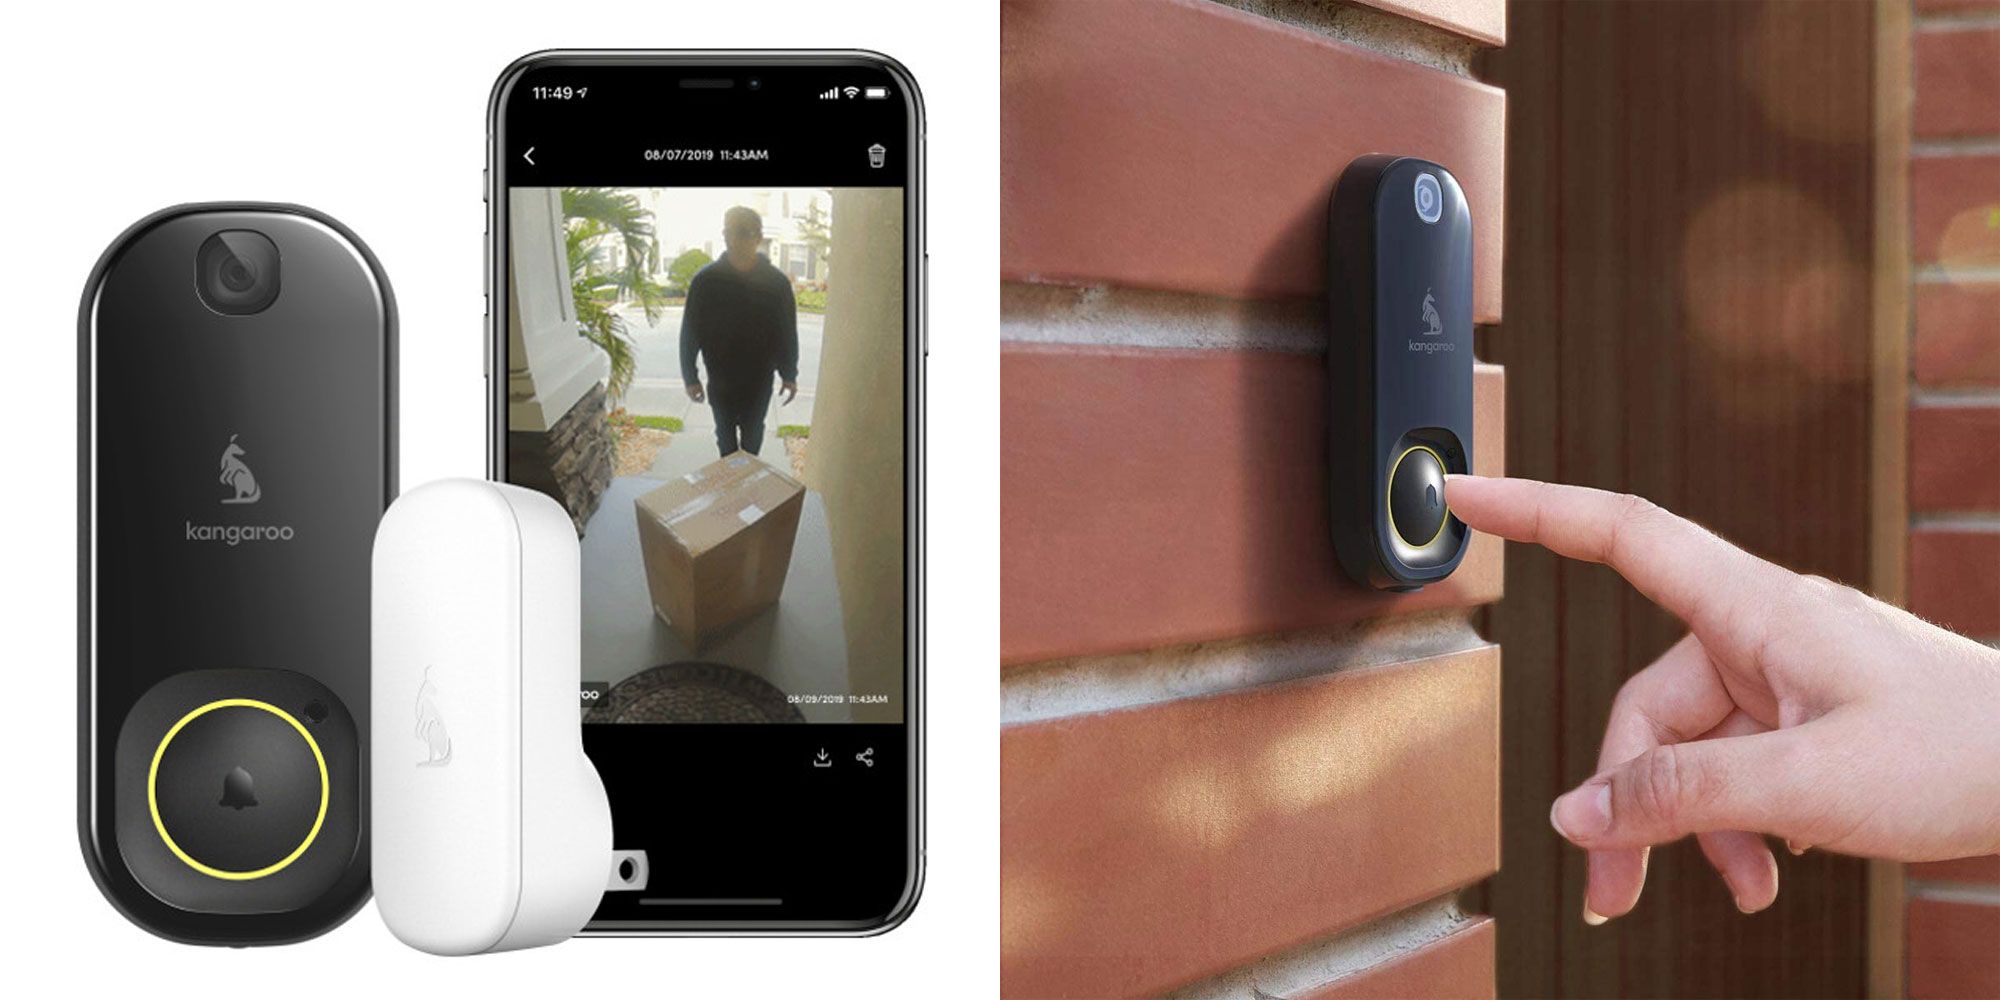 Product images of the Kangaroo Doorbell Camera + Chime.